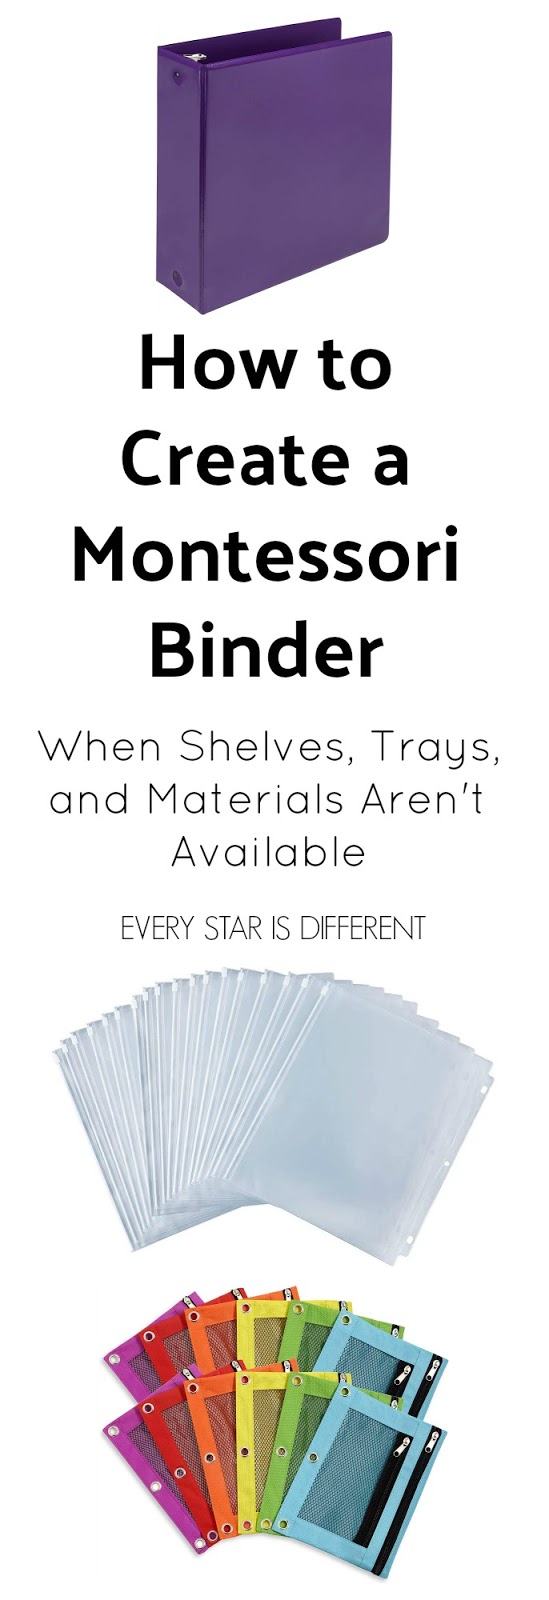 How to Create a Montessori Binder - Every Star Is Different